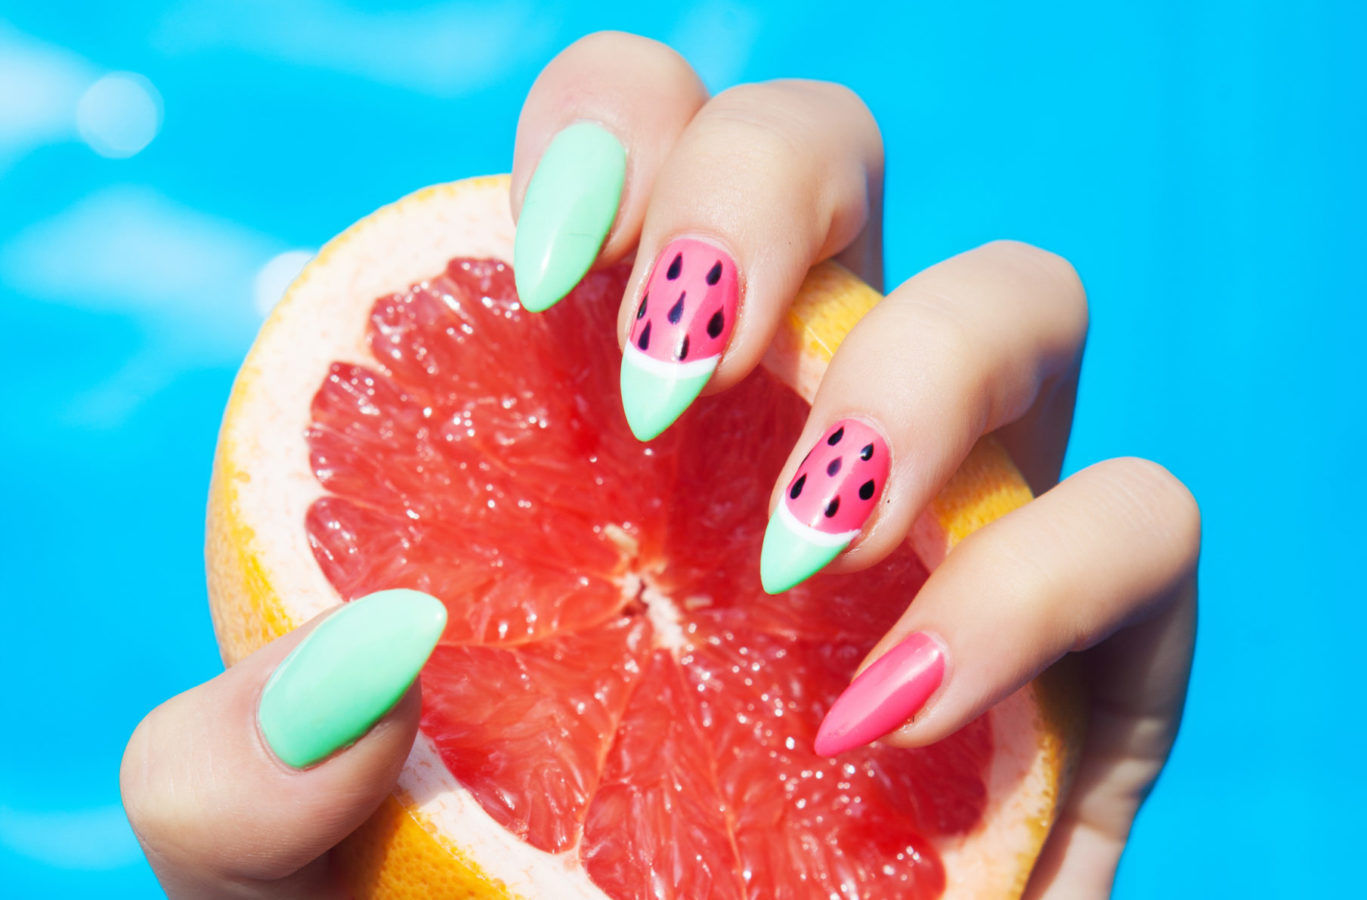 12 nail art ideas for a flawless holiday manicure